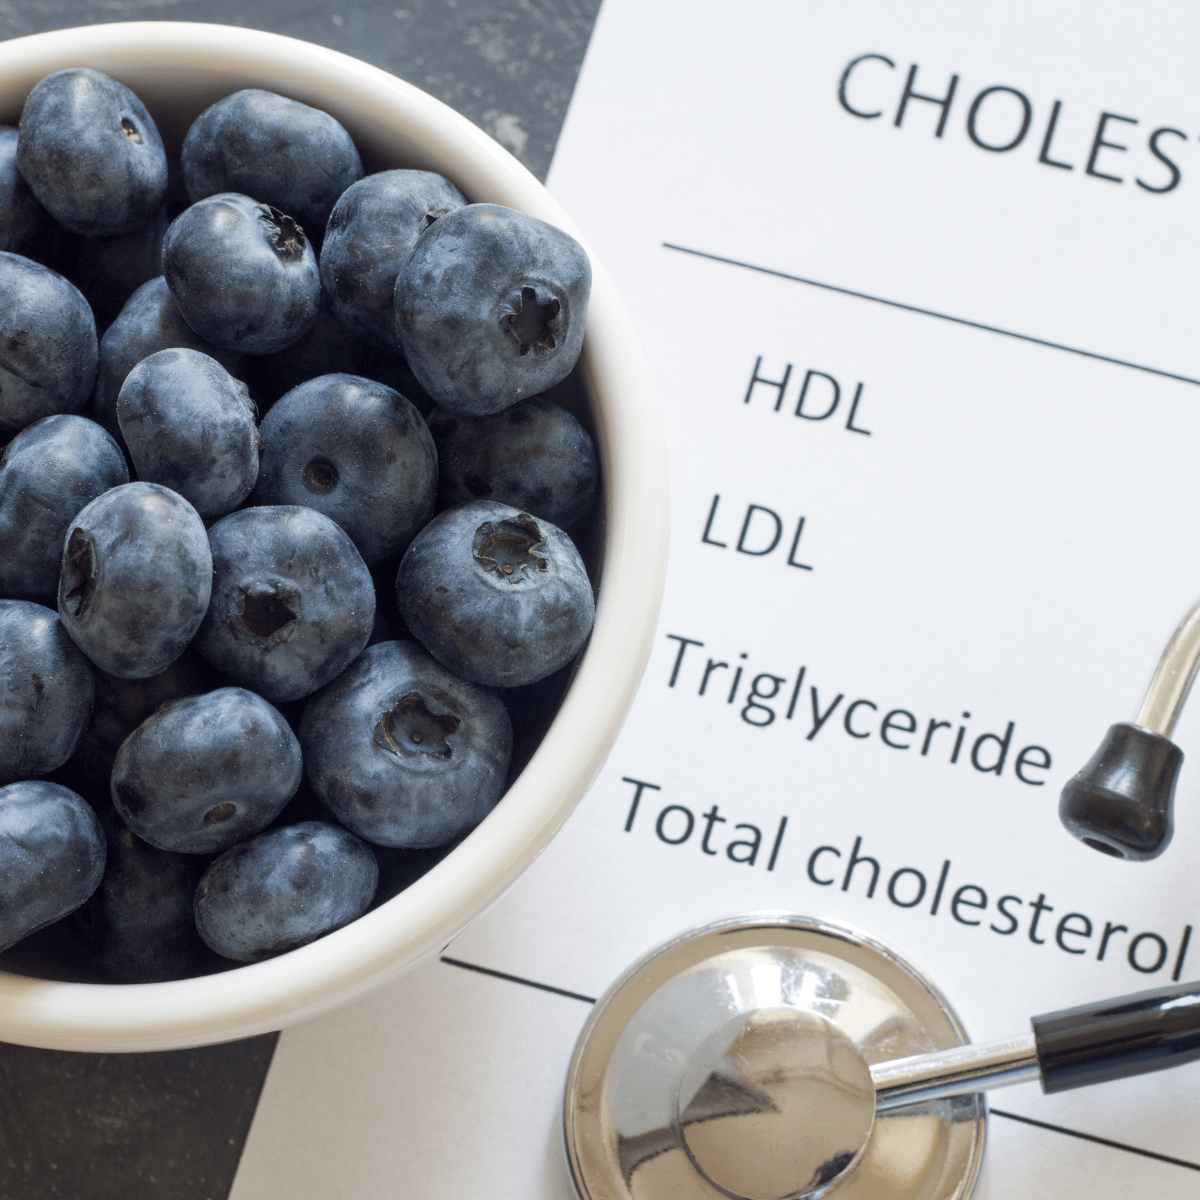 Taking Care of Cholesterol Through Fasting